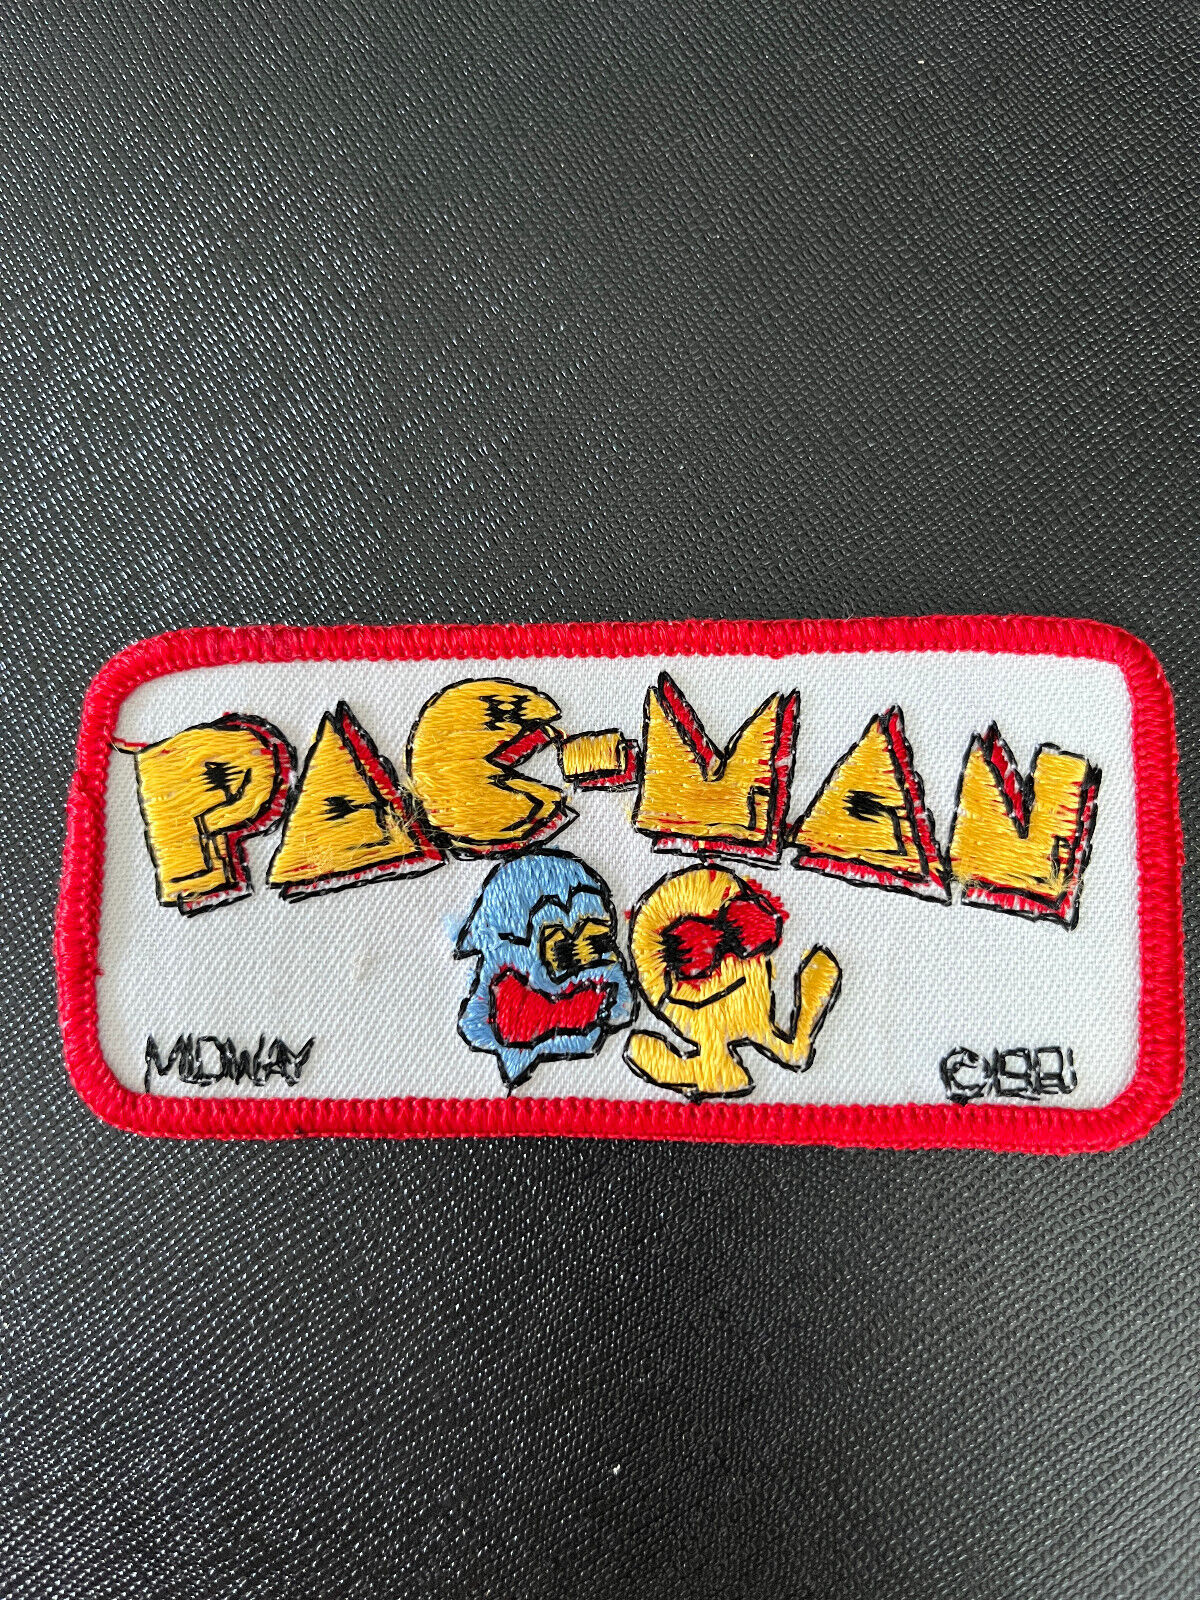 Vintage 1981  Midway Pac-Man Video Game Patch